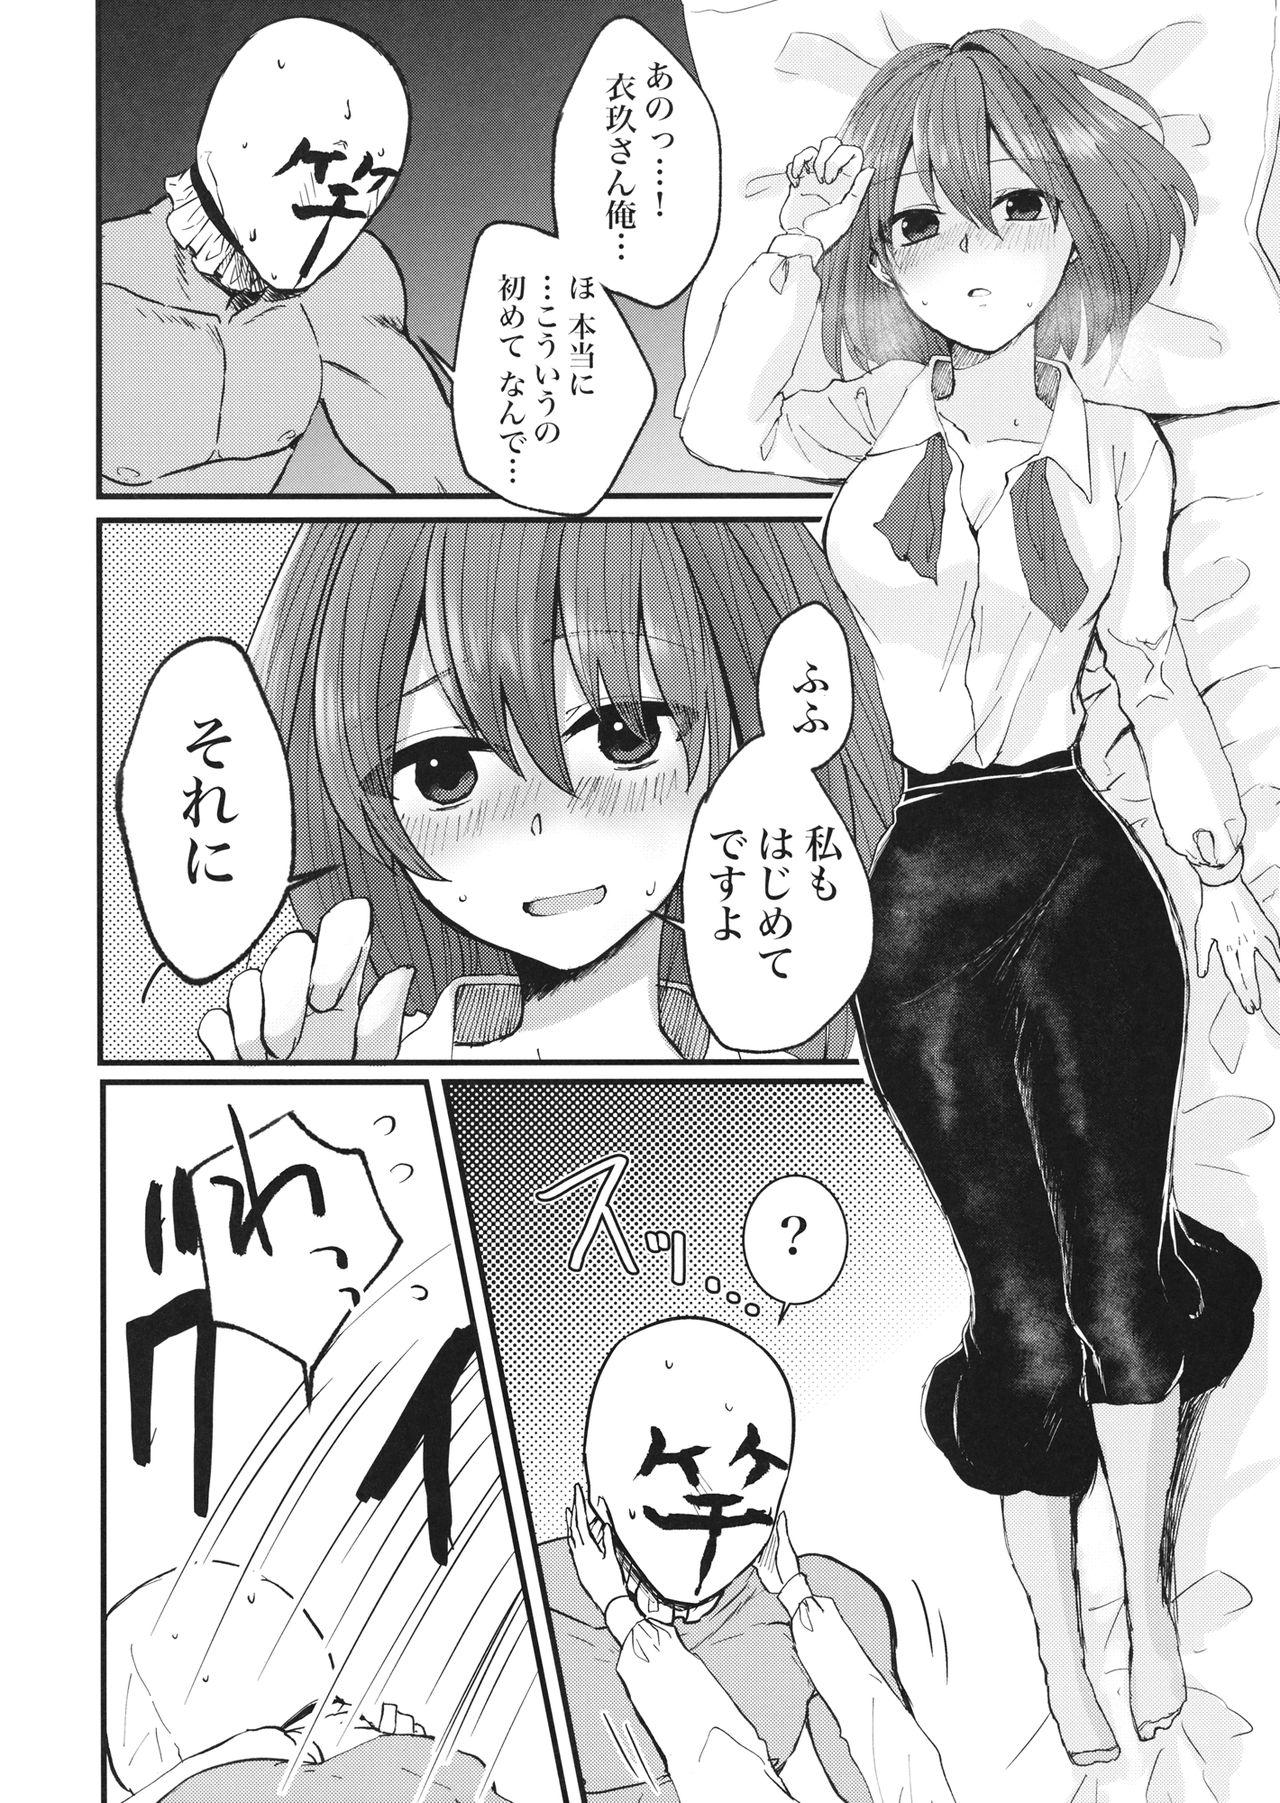 Rico 衣玖さんと一緒に色々頑張る本 - Touhou project Mexican - Page 11